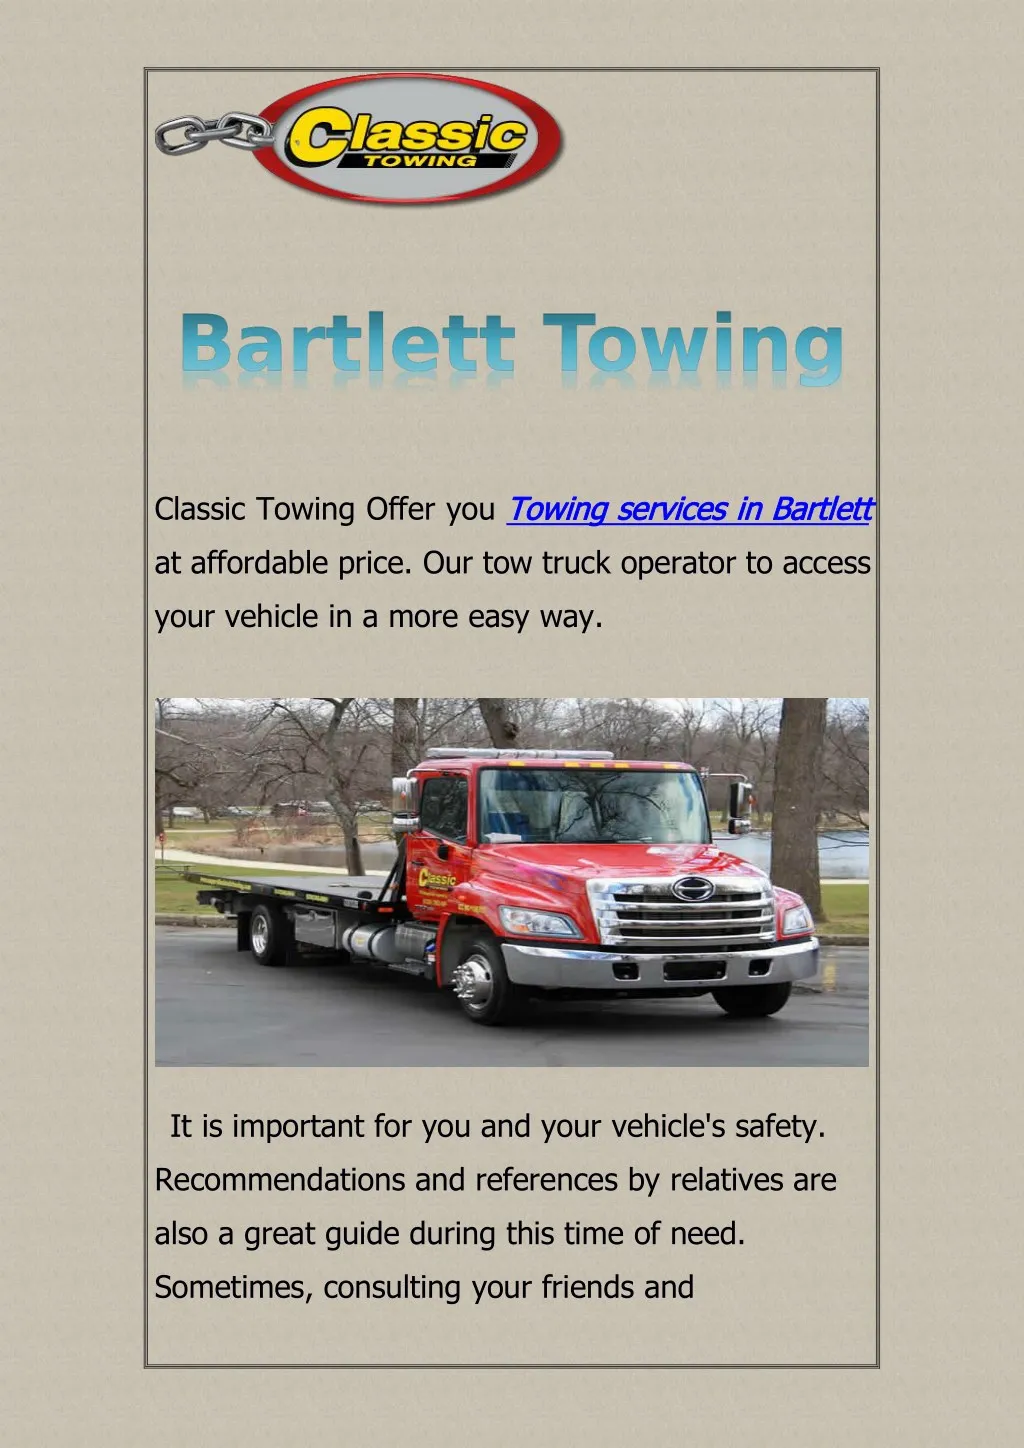 classic towing offer you towing